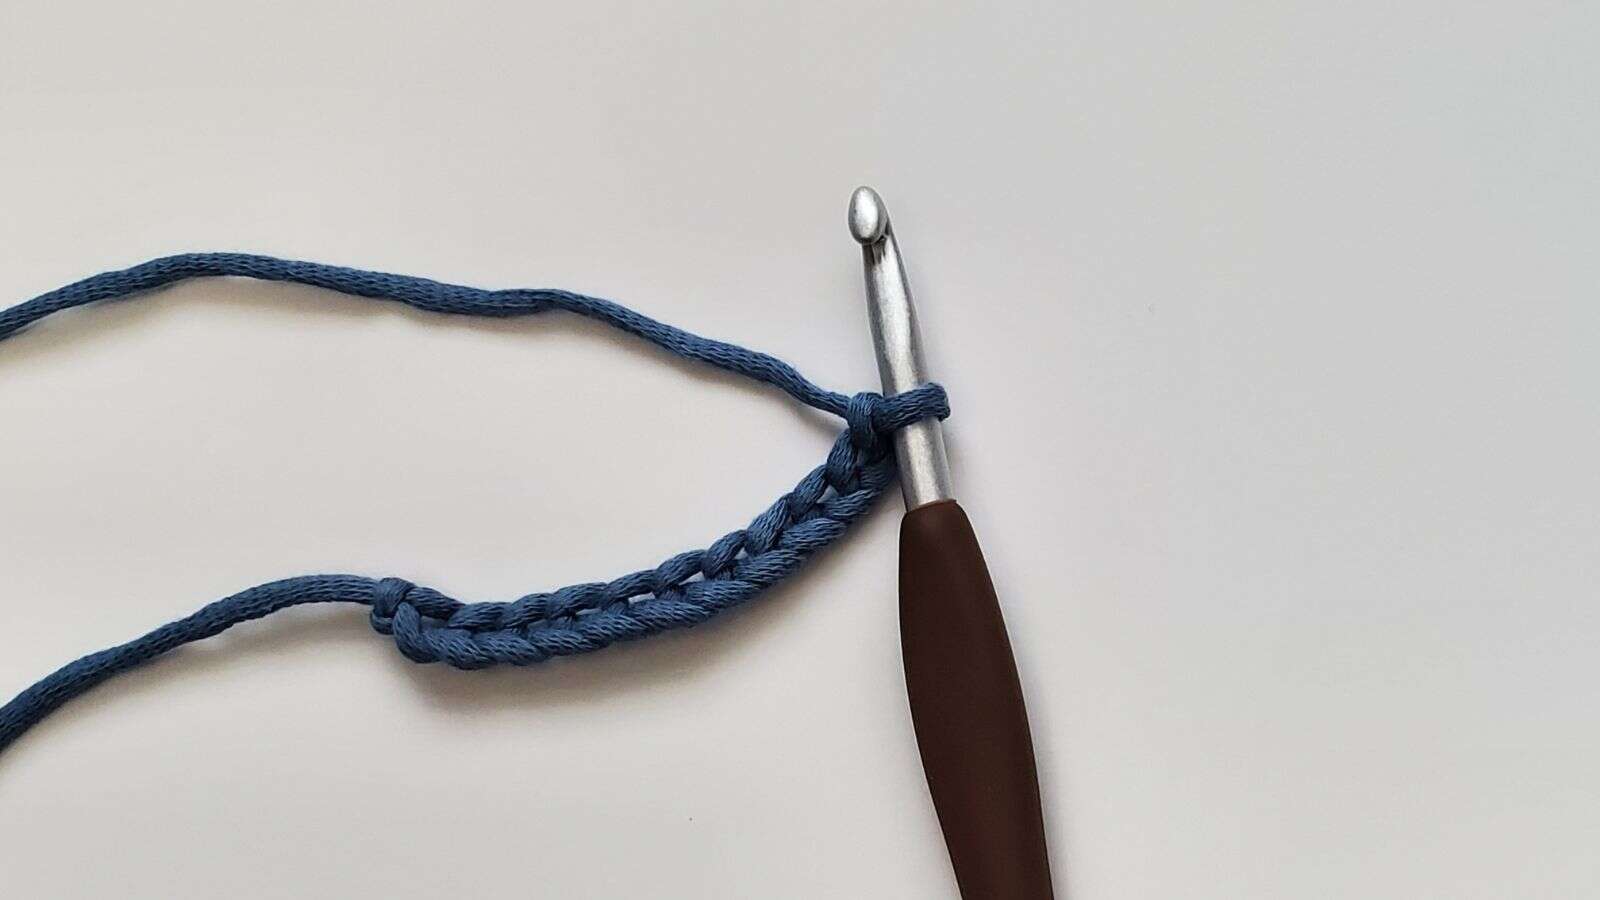 Initial foundation chain for starting an extended single crochet